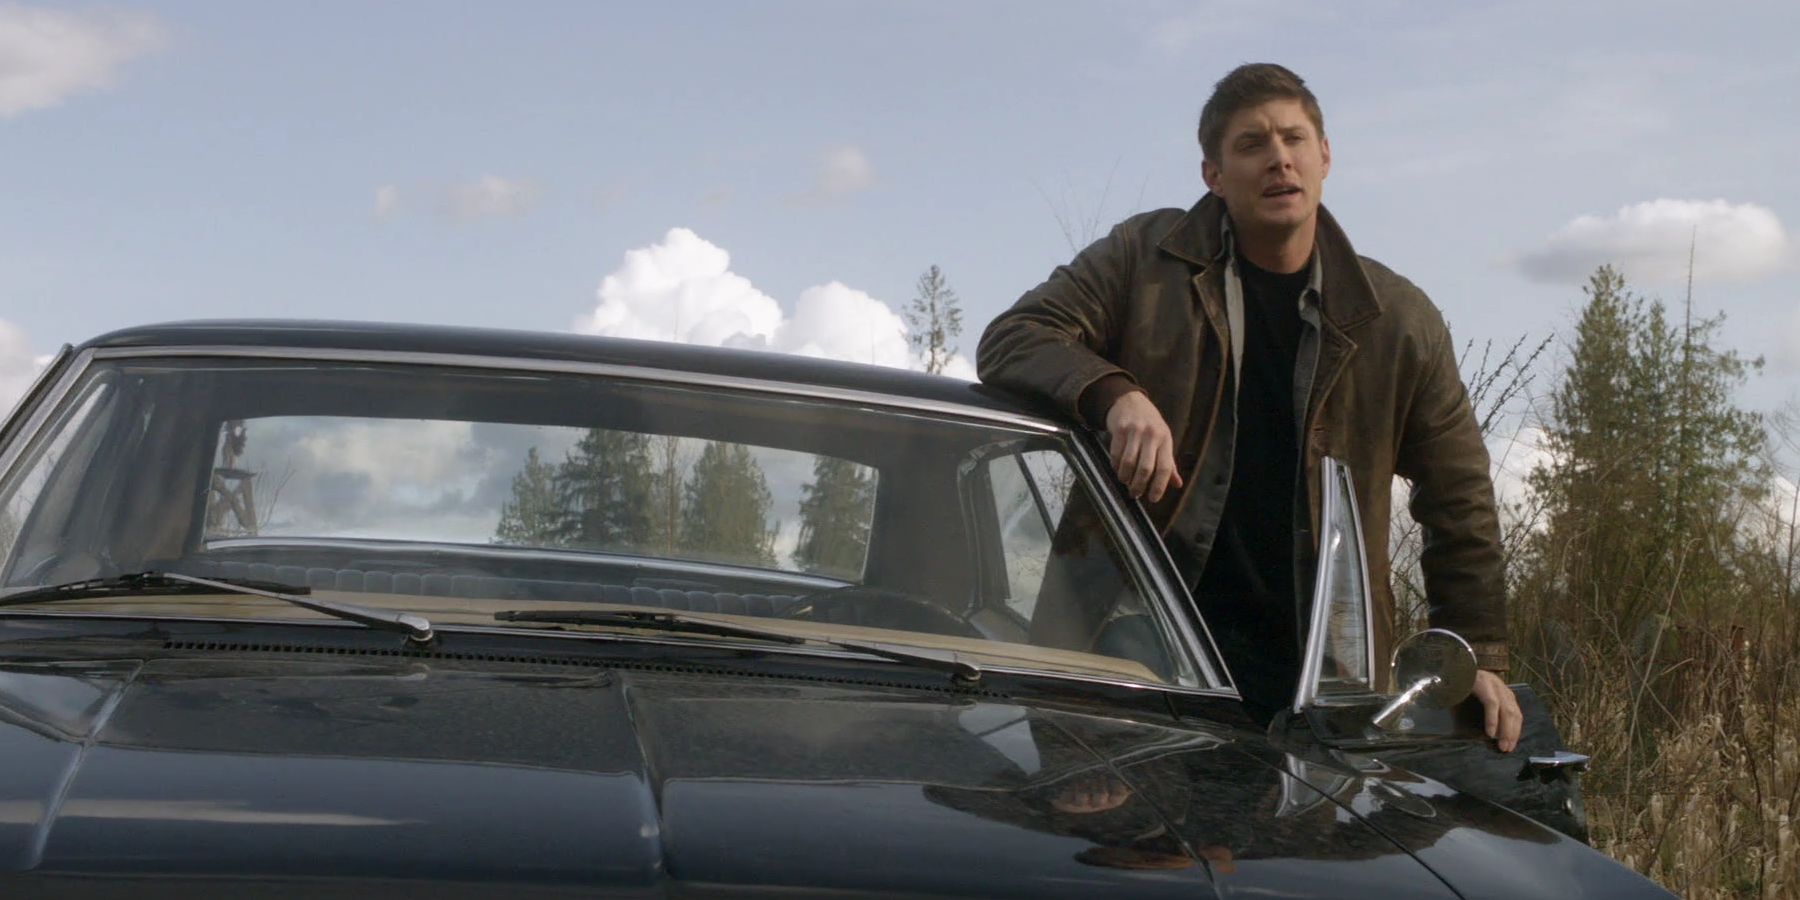 Dean in his Impala car in Swan Song episode of Supernatural